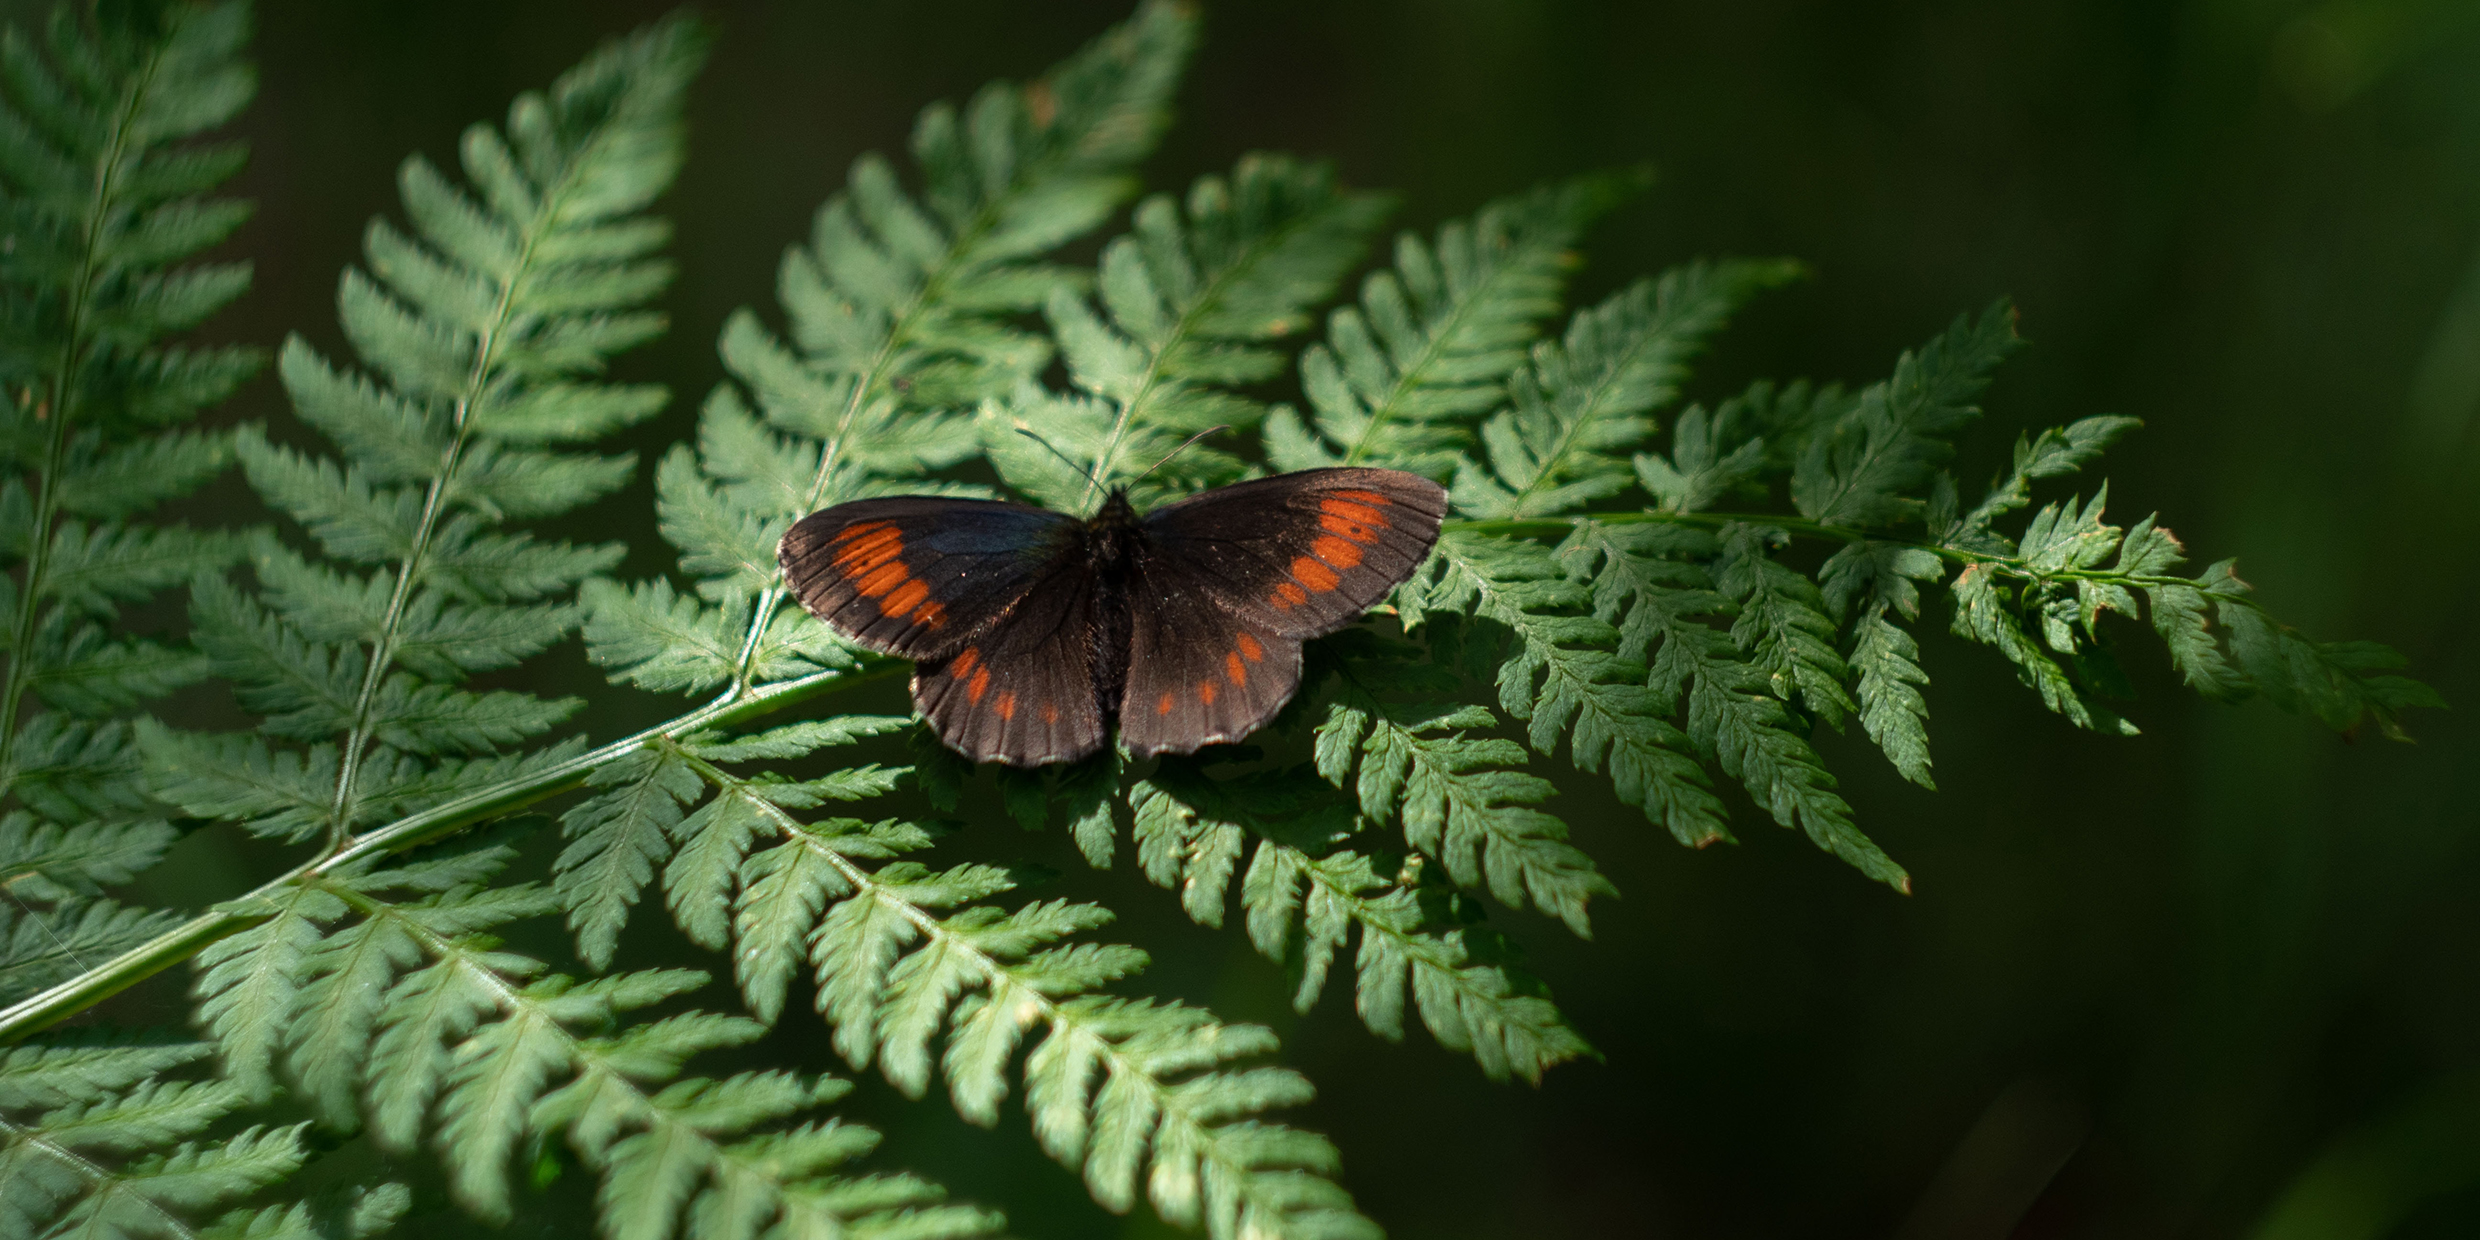 Image of a butterfly resting on a fern frond